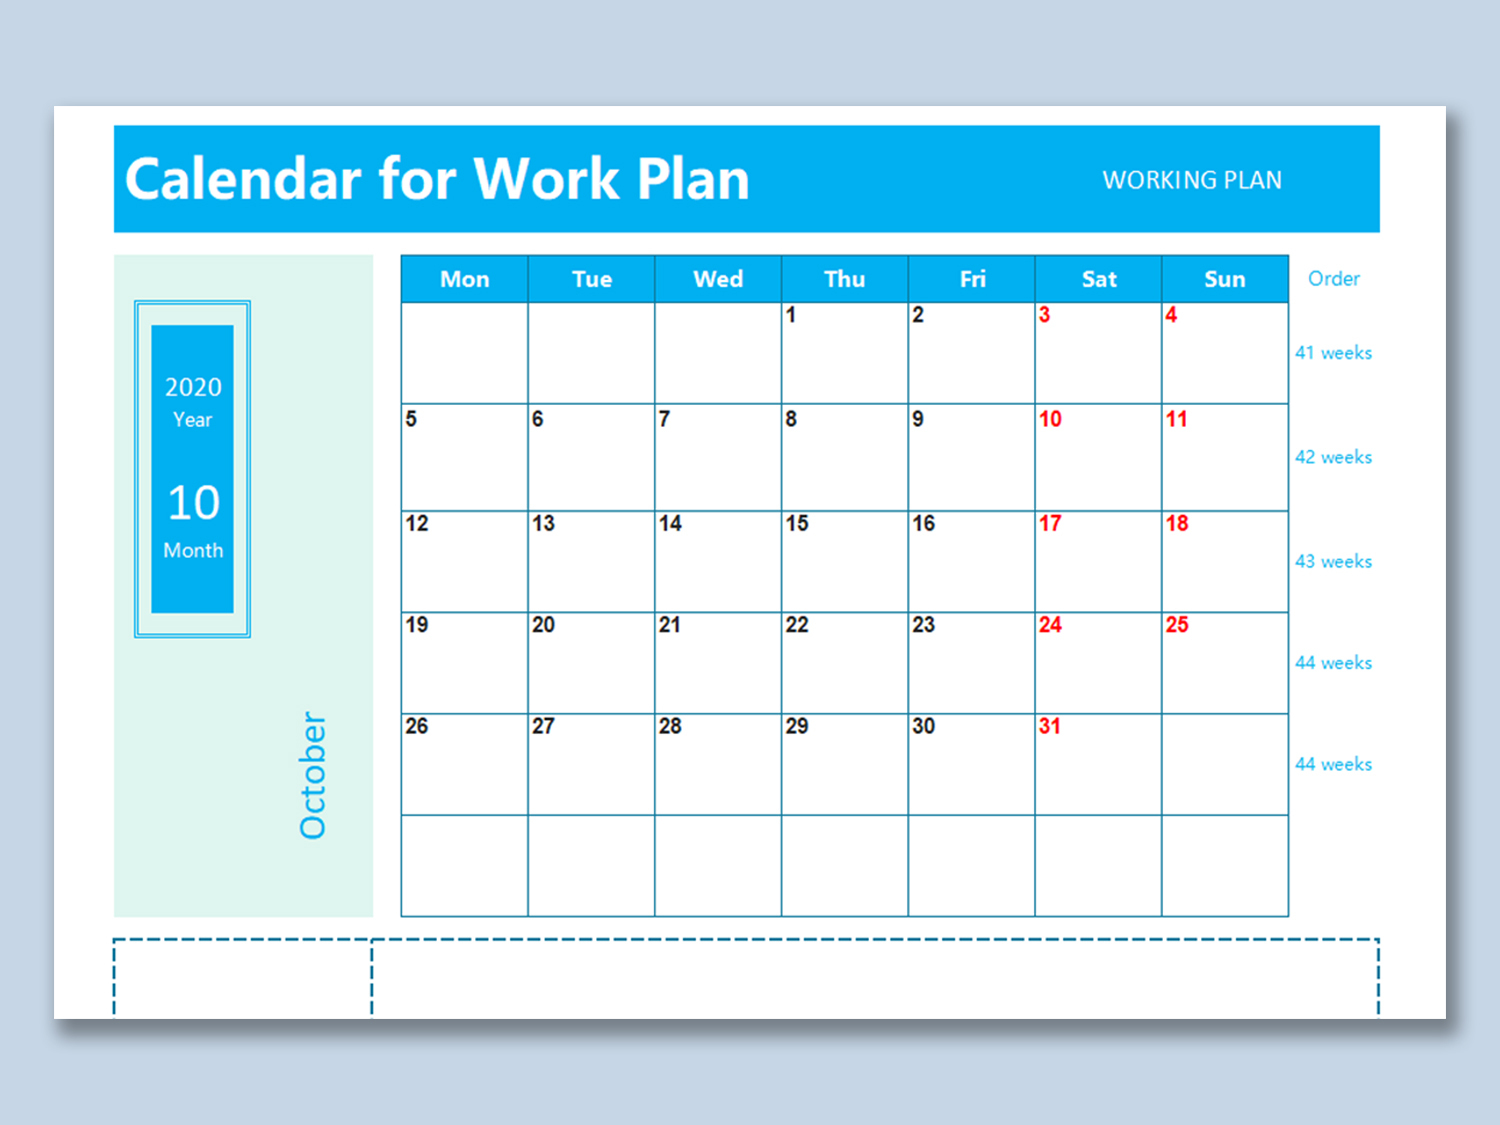 propsed calendar for work outs on excel 9